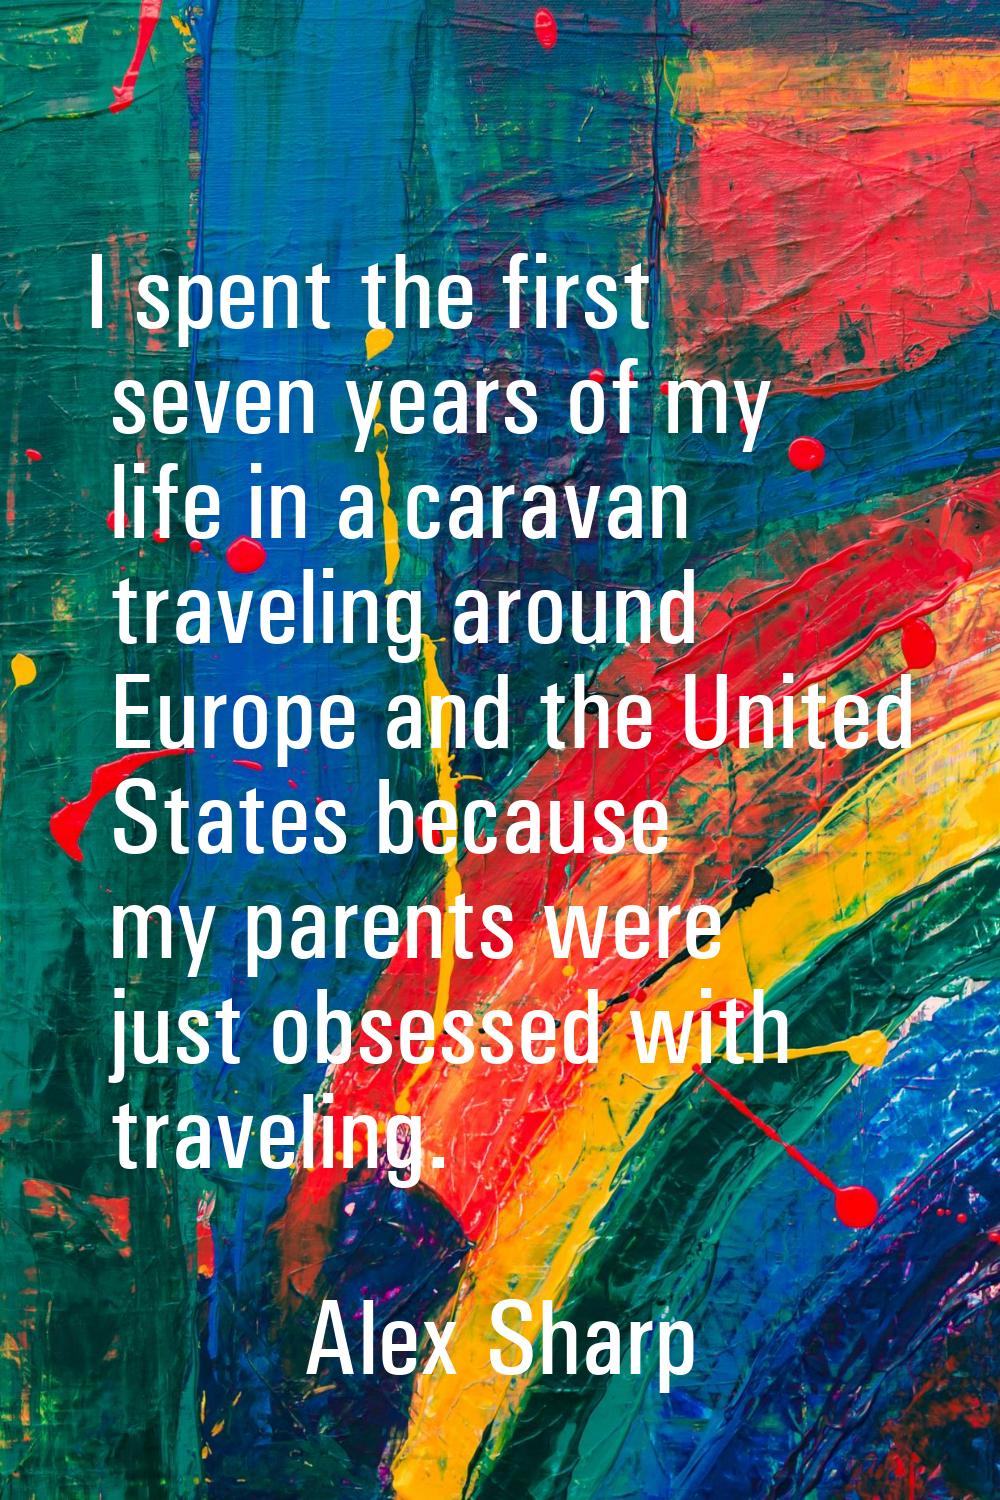 I spent the first seven years of my life in a caravan traveling around Europe and the United States